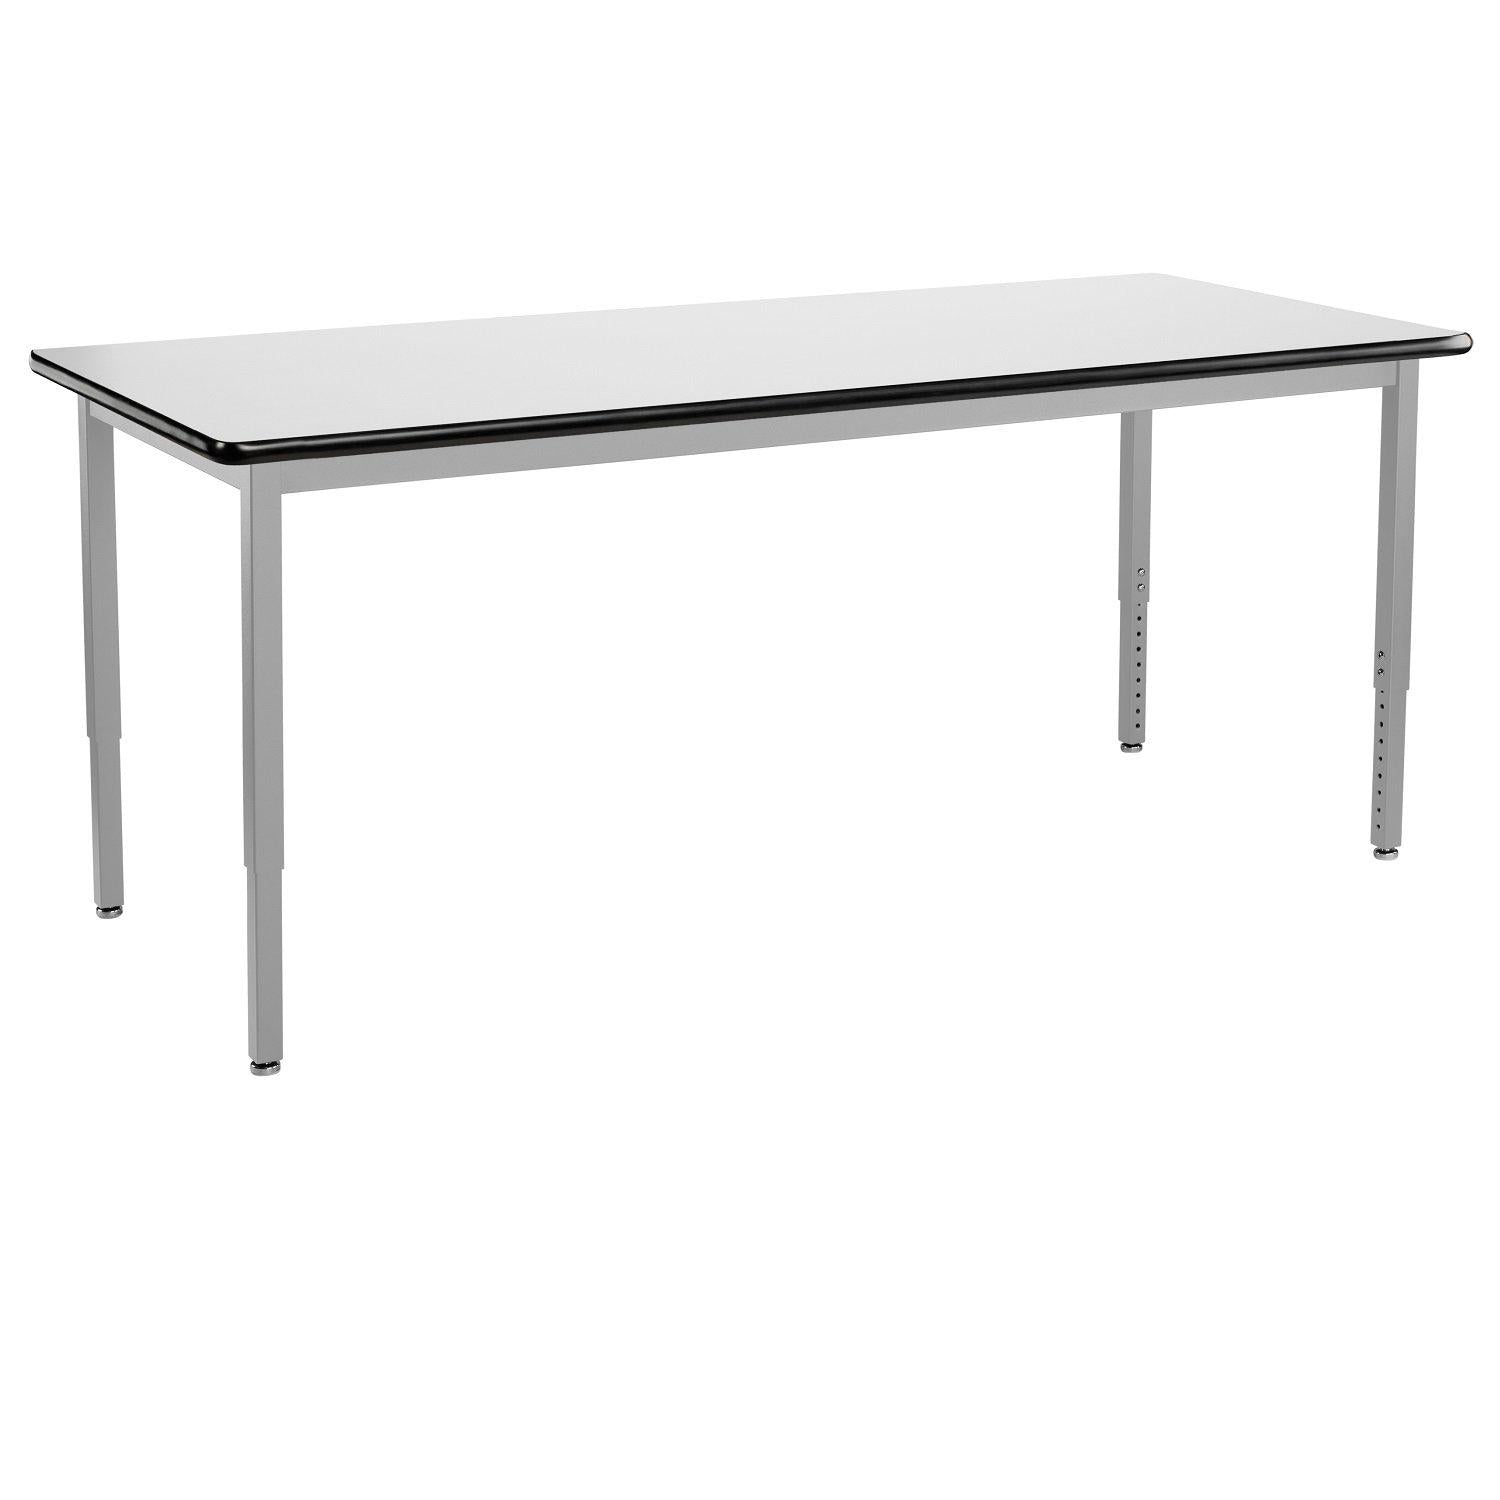 Heavy-Duty Height-Adjustable Utility Table, Soft Grey Frame, 30" x 72", Whiteboard High-Pressure Laminate Top